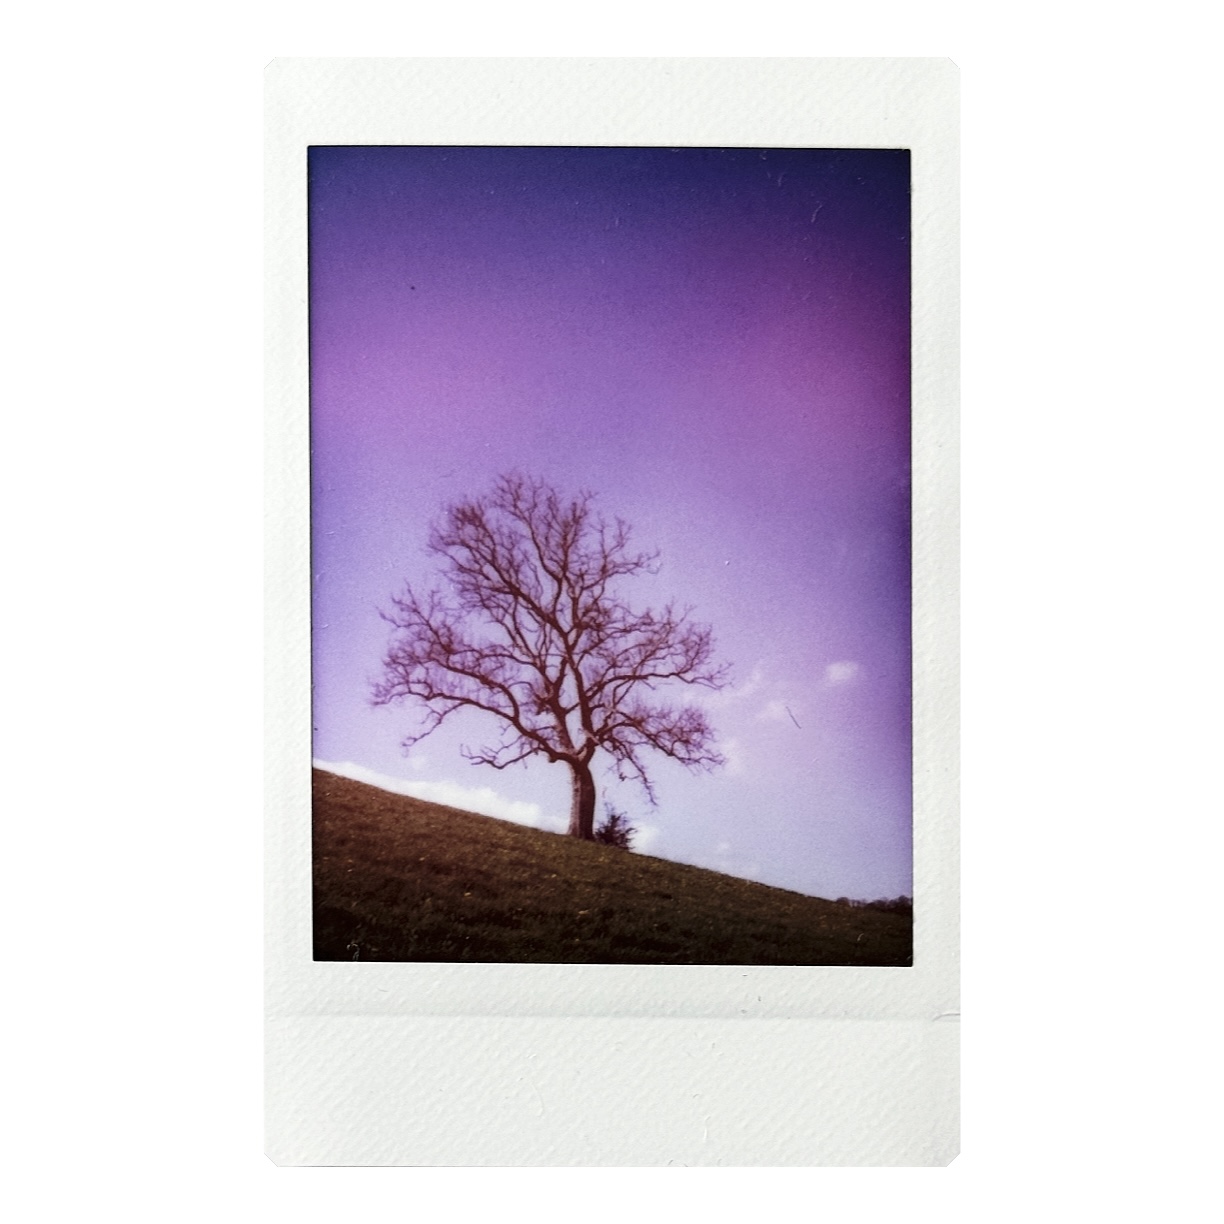 Fujifilm Instax Mini 99 instant print of a tree silhouette on crest of a hill with creative color effect